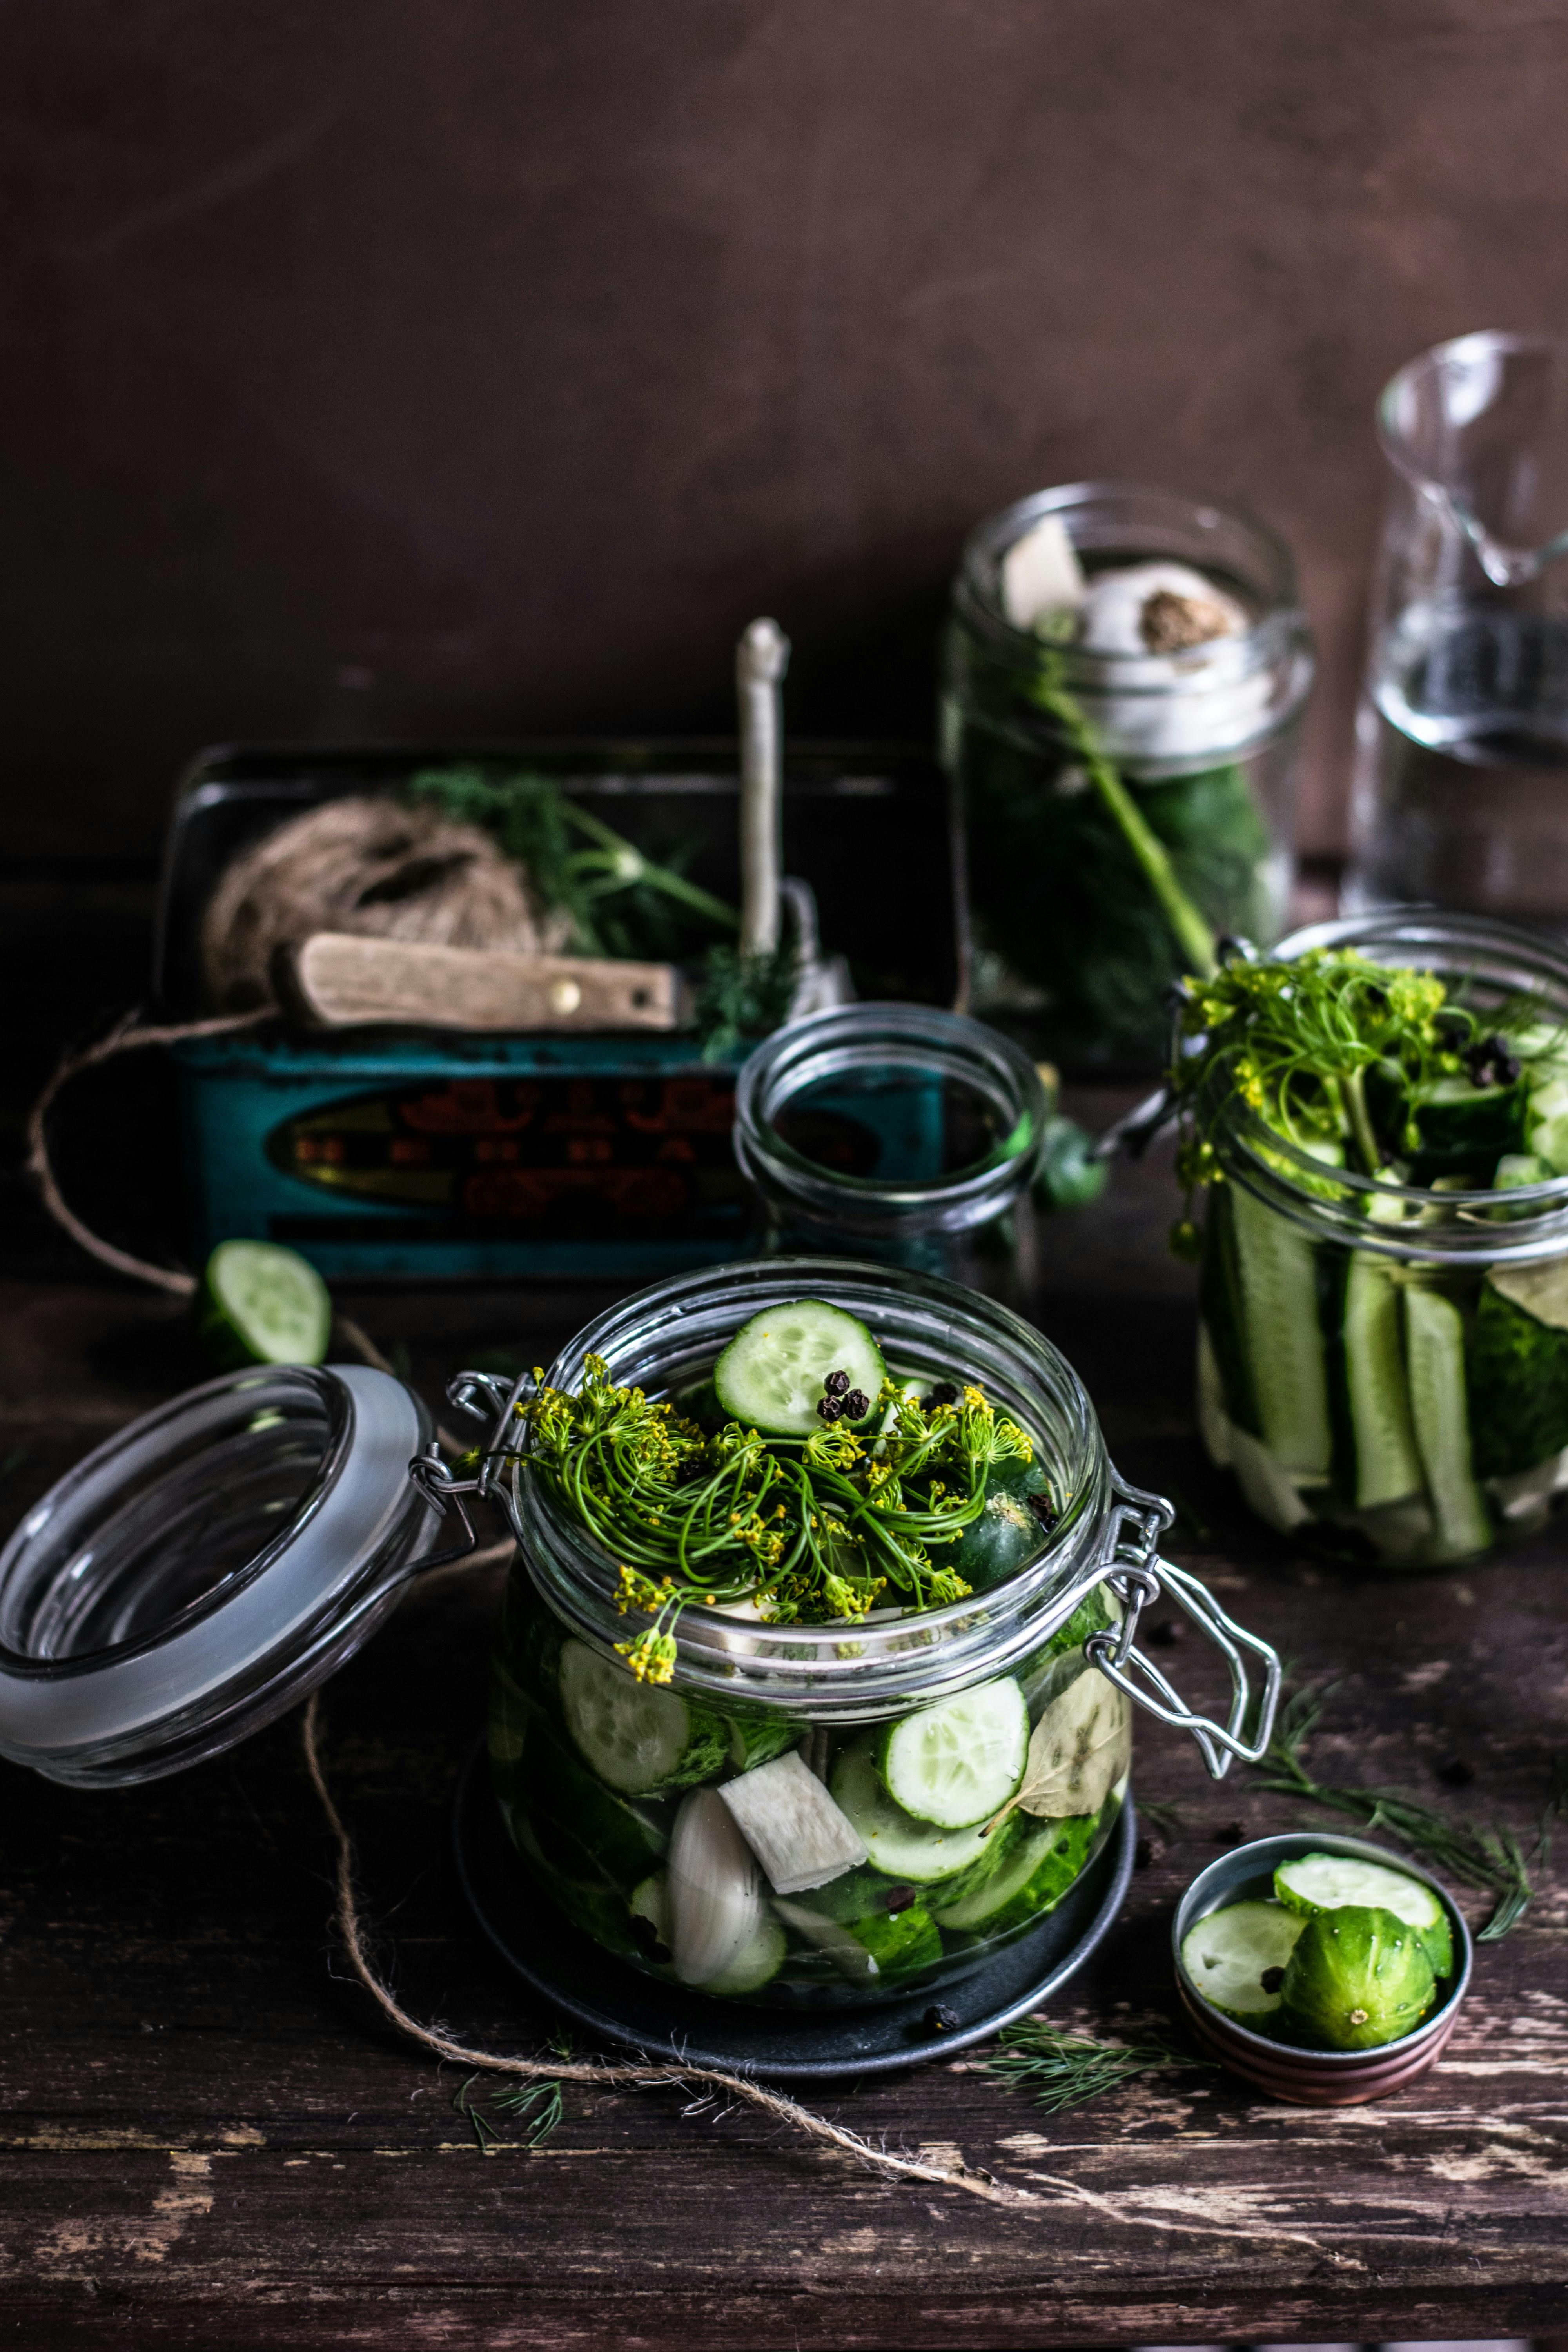 Homemade pickles with floral aromatics